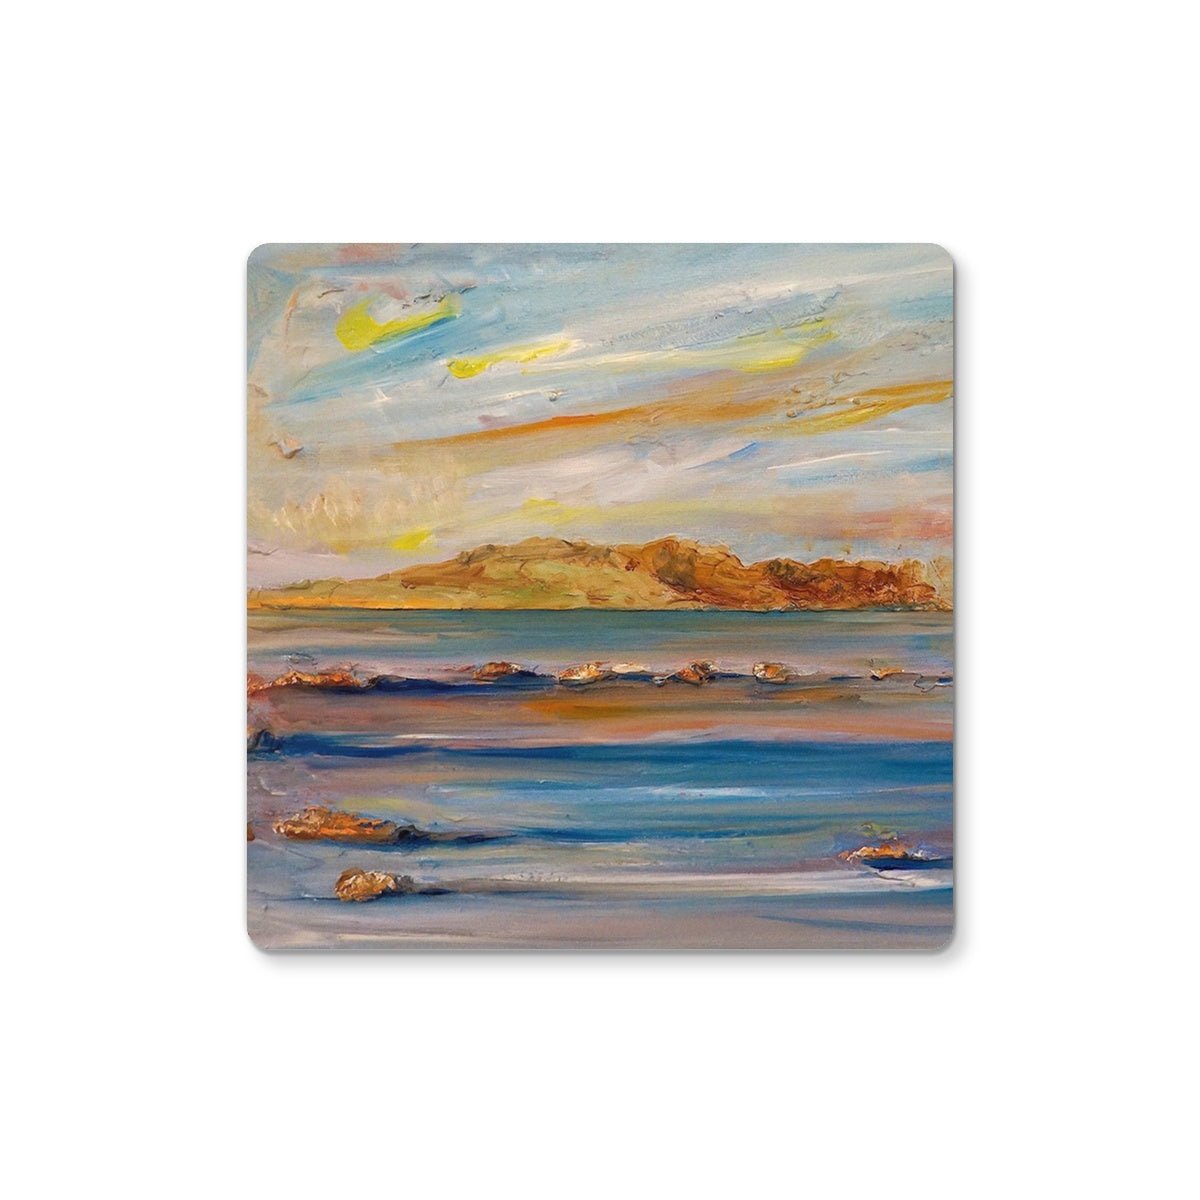 Tiree Dawn Art Gifts Coaster-Coasters-Hebridean Islands Art Gallery-Single Coaster-Paintings, Prints, Homeware, Art Gifts From Scotland By Scottish Artist Kevin Hunter